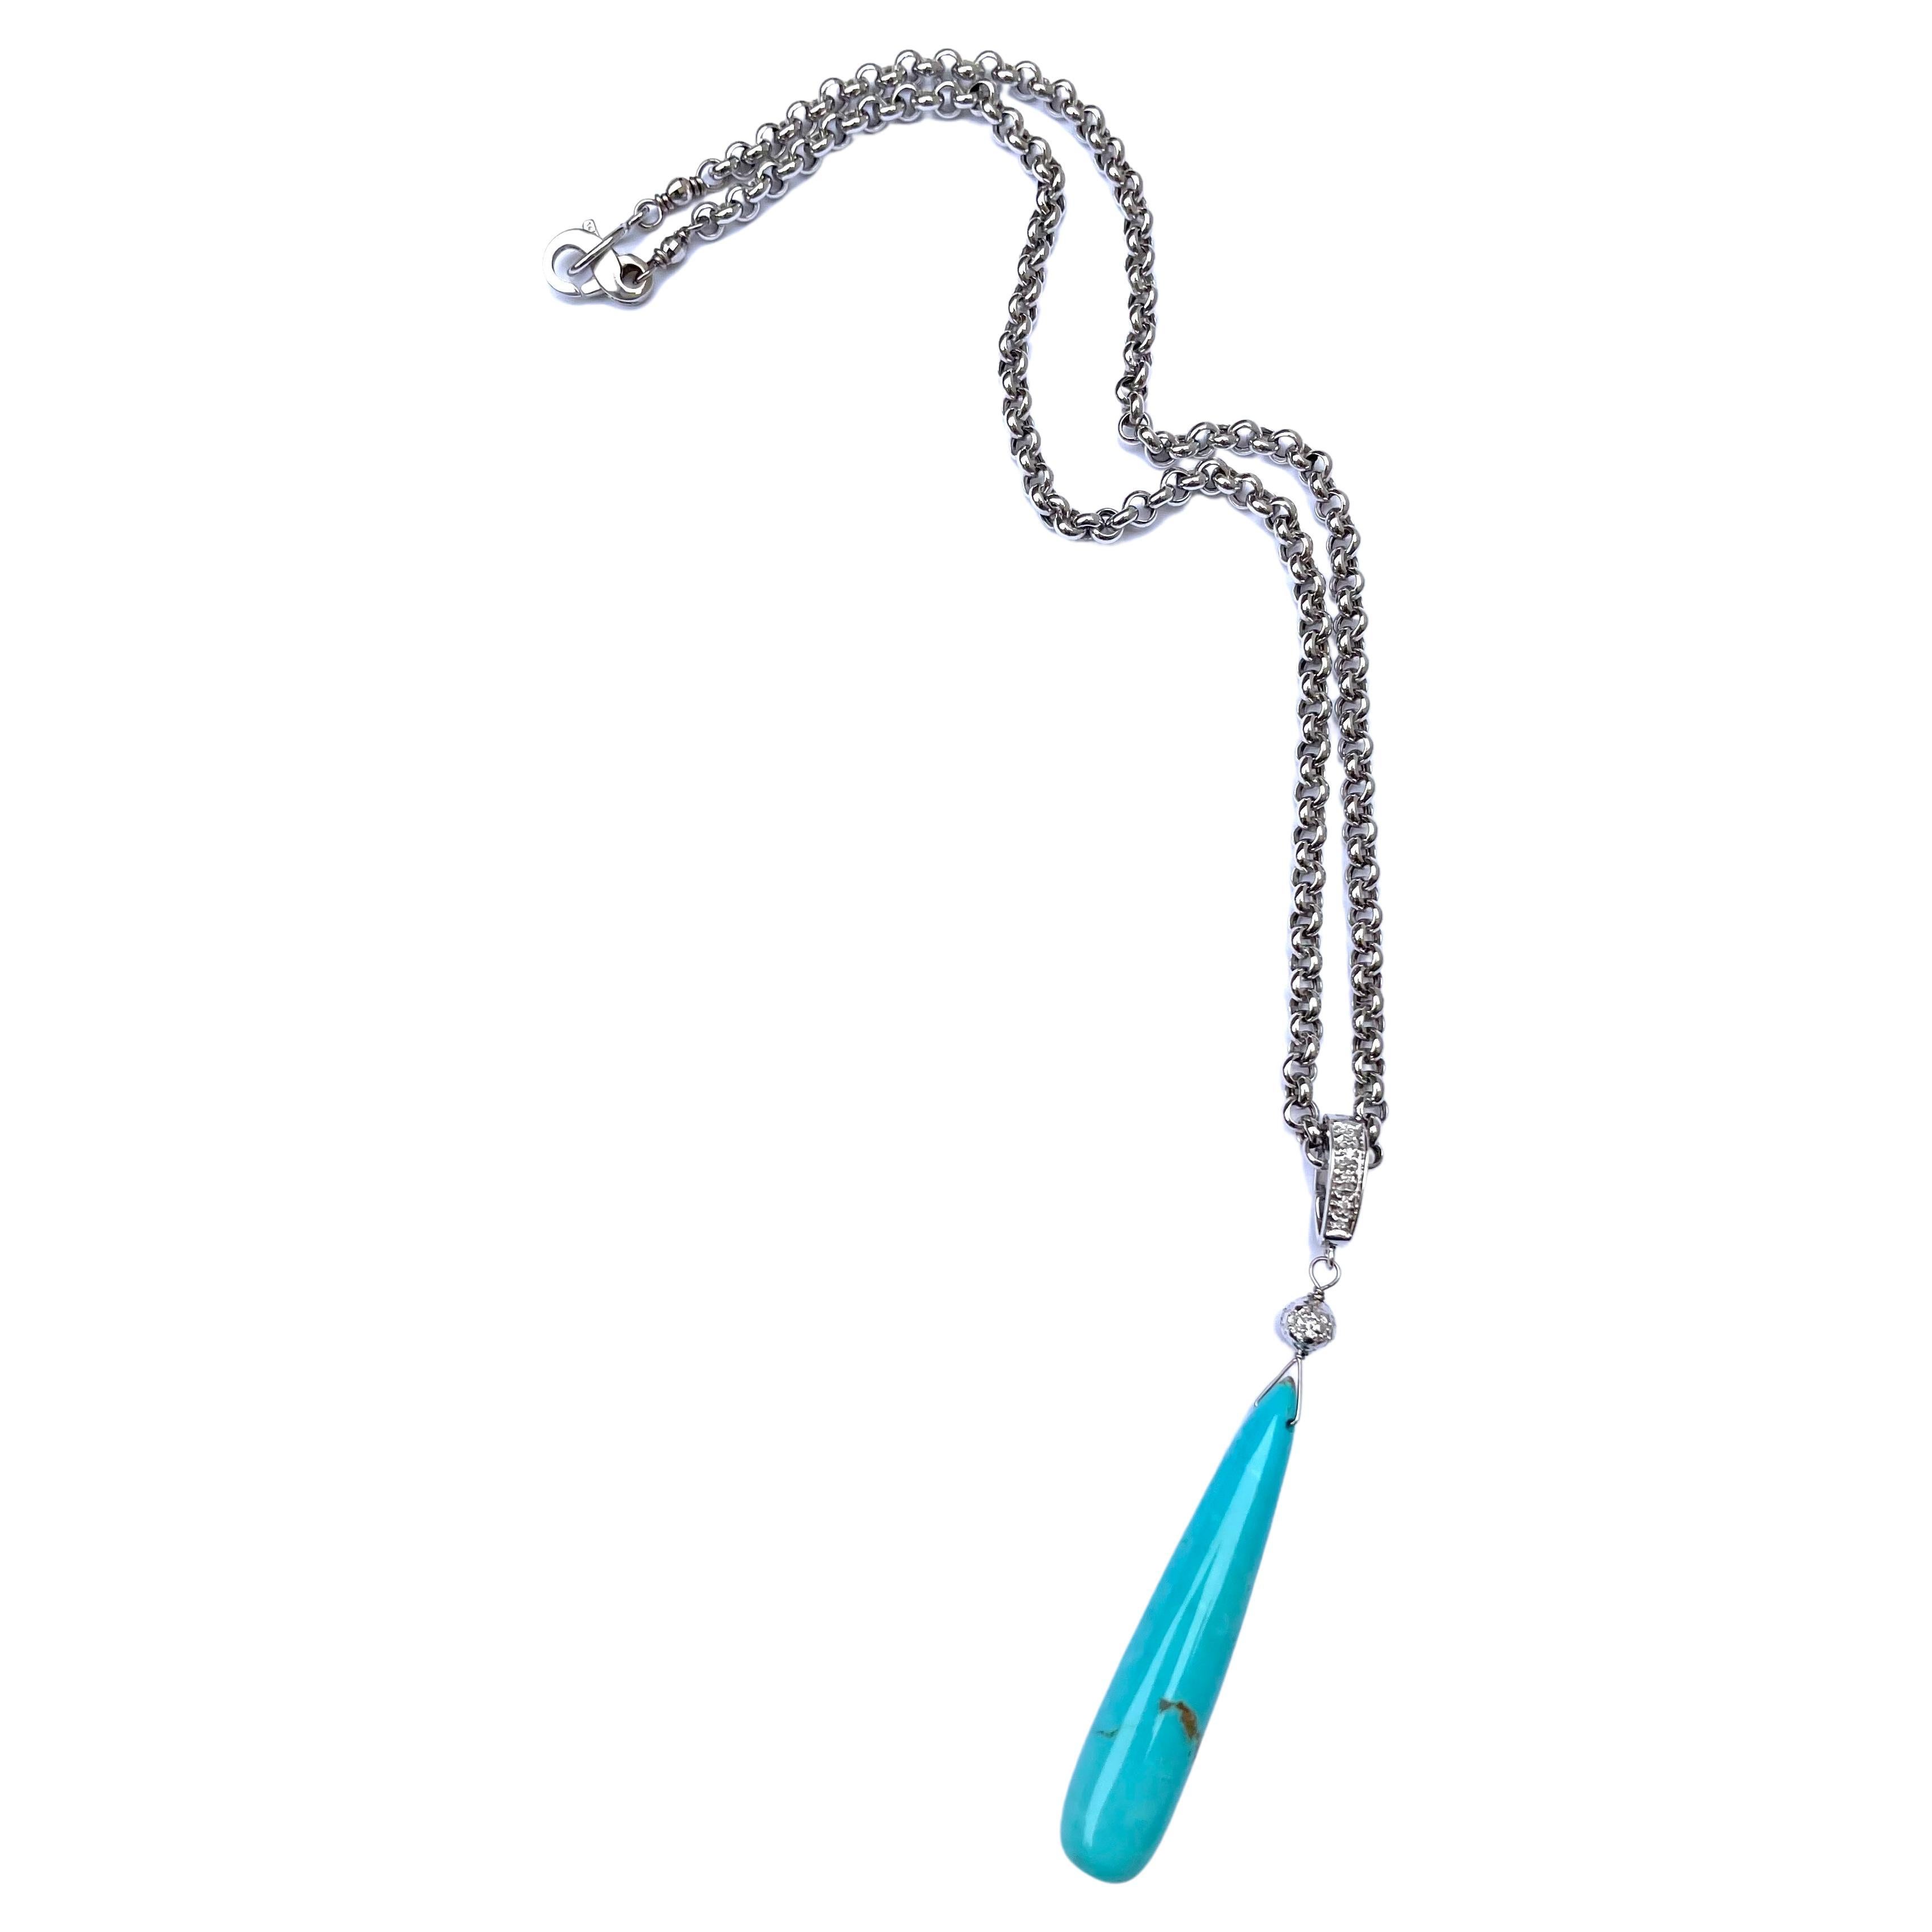 Description
Exquisite, long and smooth Sleeping Beauty turquoise briolette drop with its natural matrix, diamond accented on a 14k white gold chain. Pendant is removable, but not sold separately.
Item # N3846

Materials and Weight
Sleeping Beauty